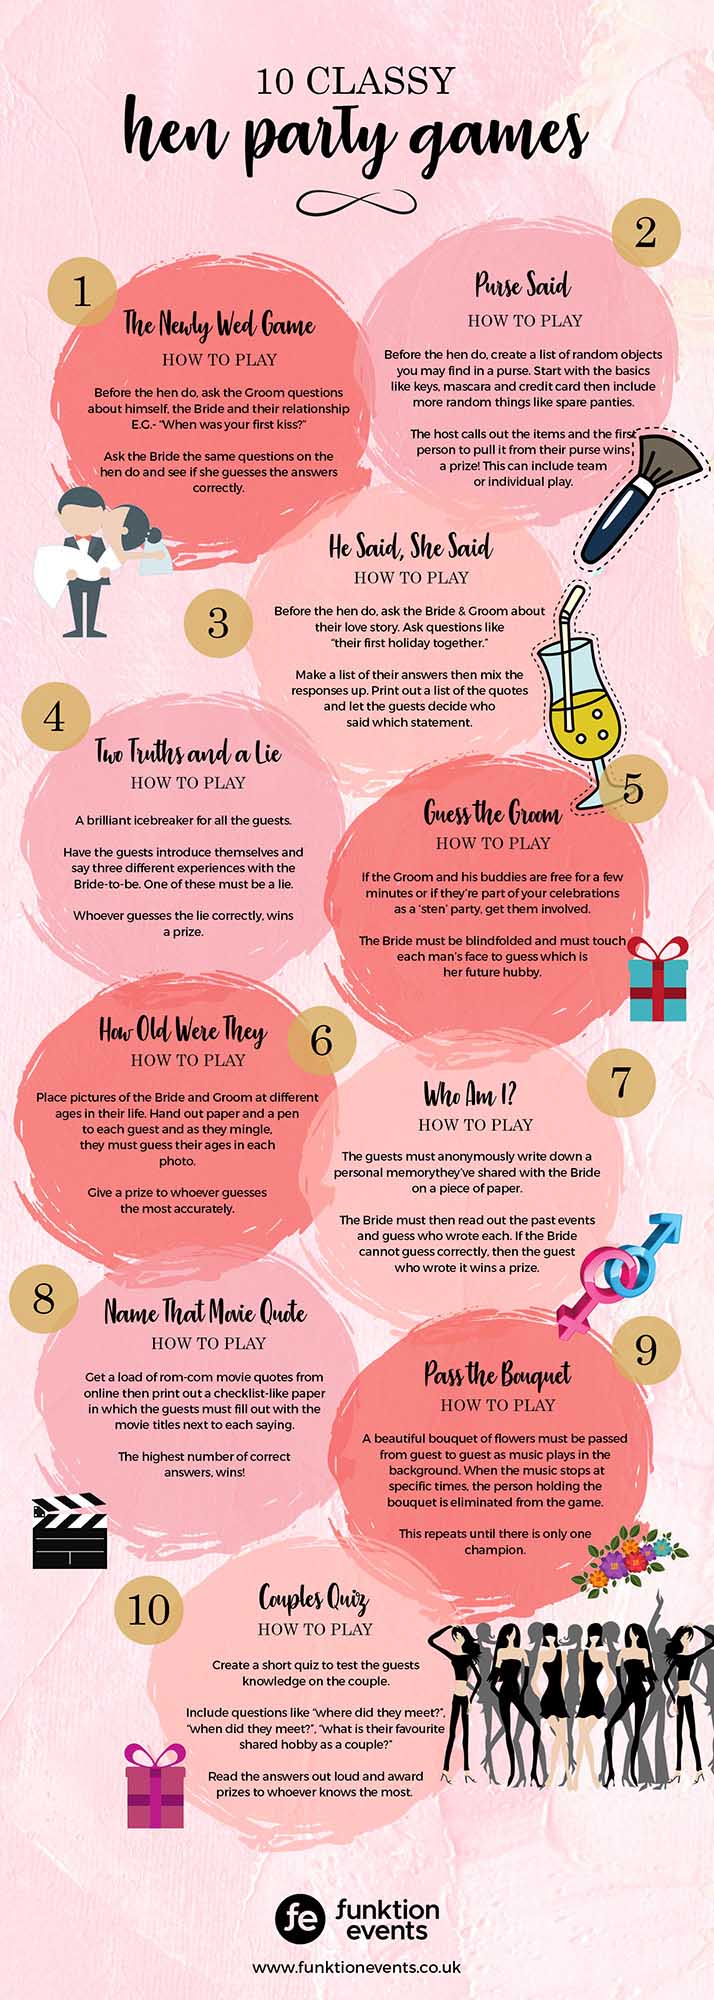 10 Classy Hen Party Games